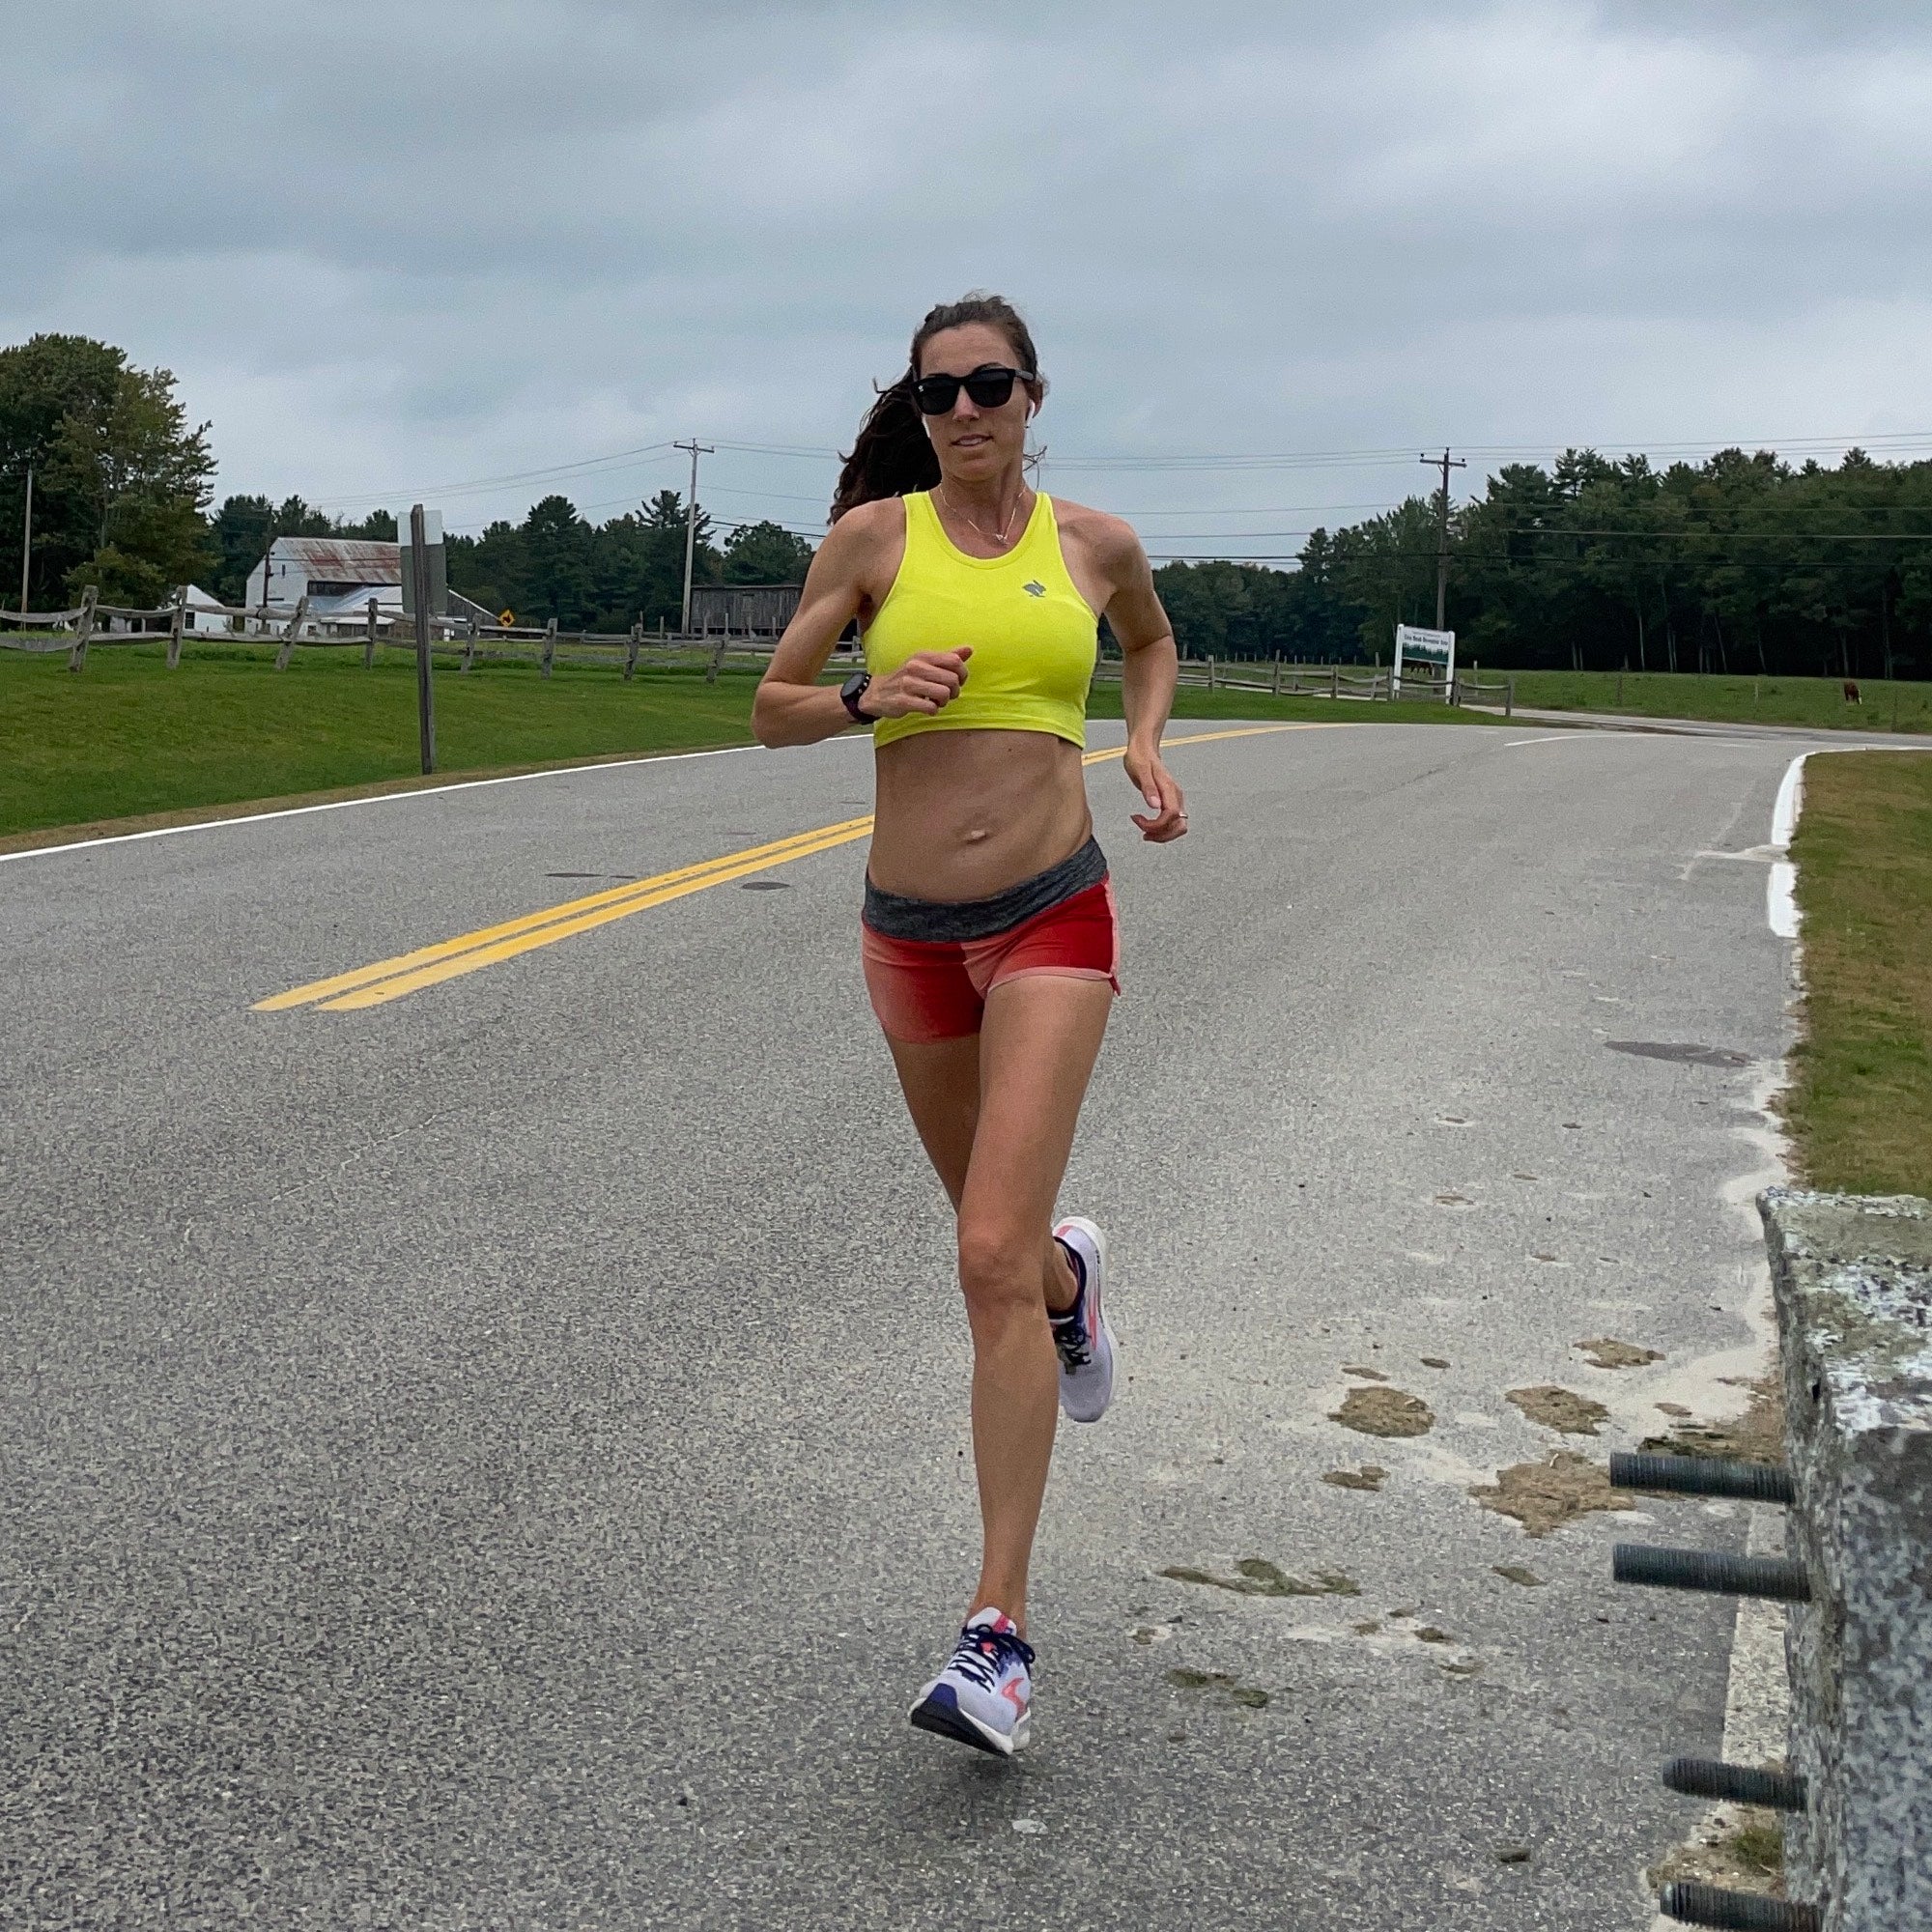 rabbitELITE Alexis Wilbert shares her mother runner x3 experiences and tips